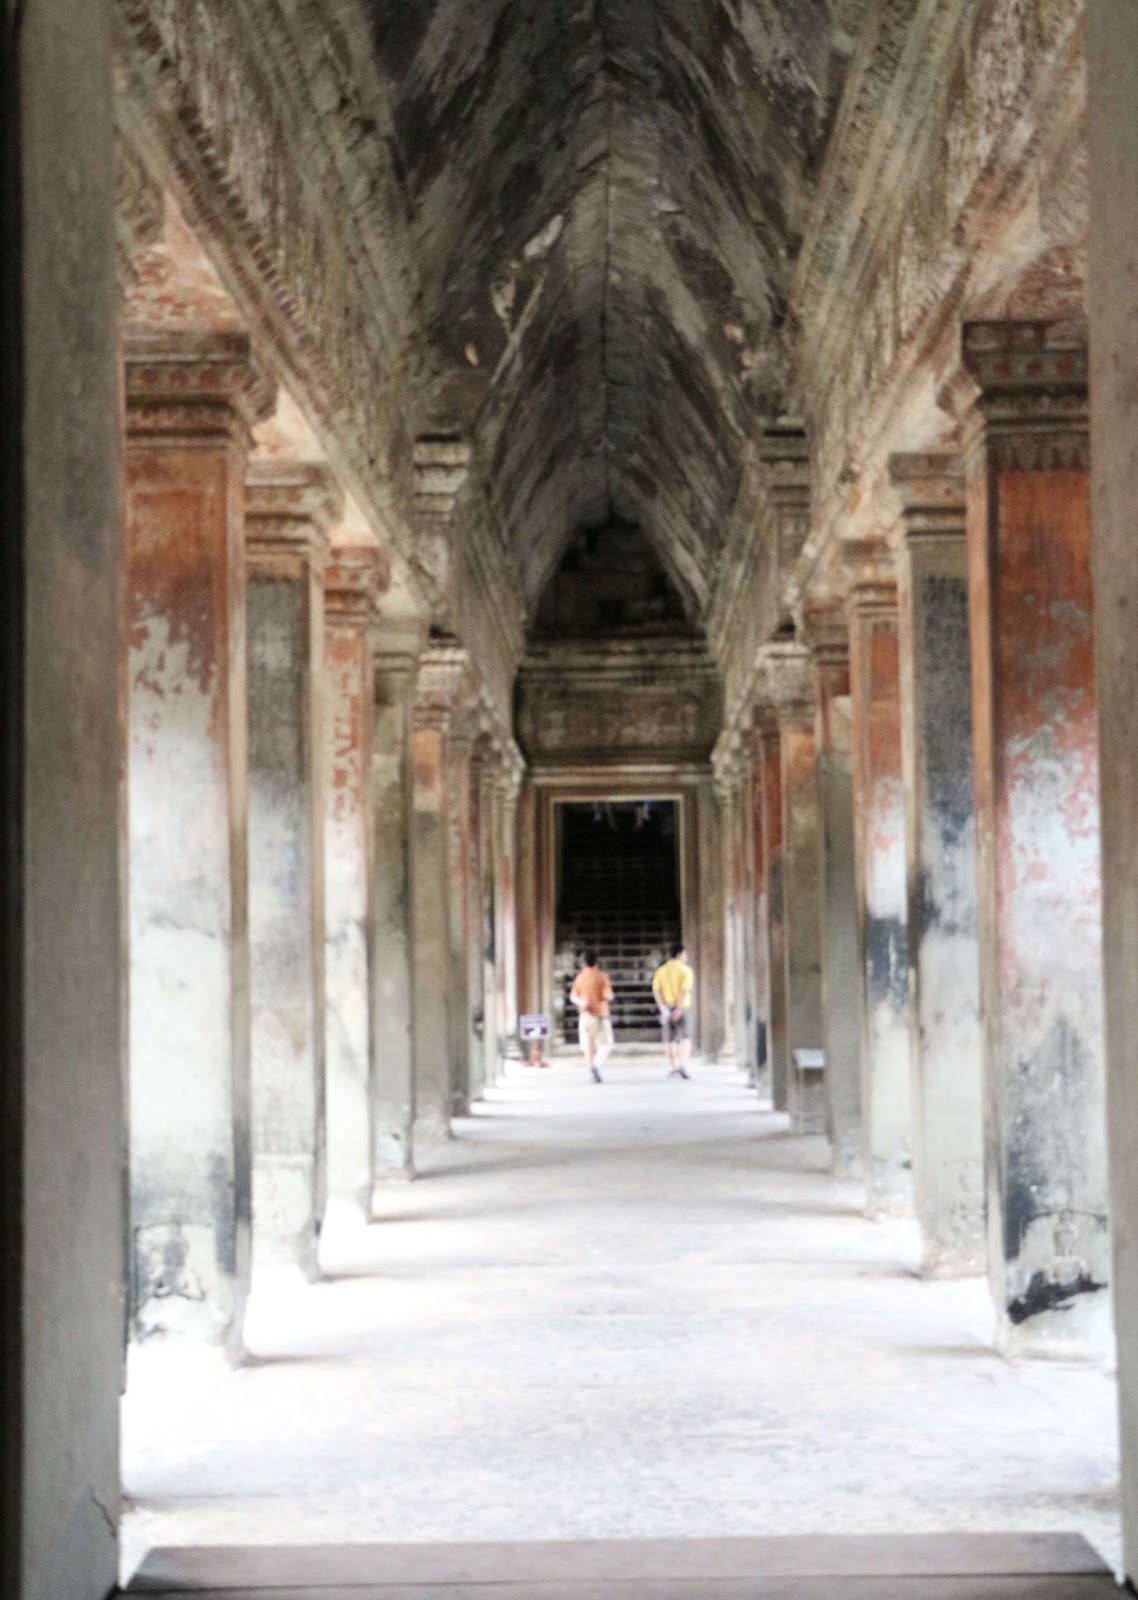 3 days in Siem Reap. This is the passageway of the outer galleries of Angkor Wat.